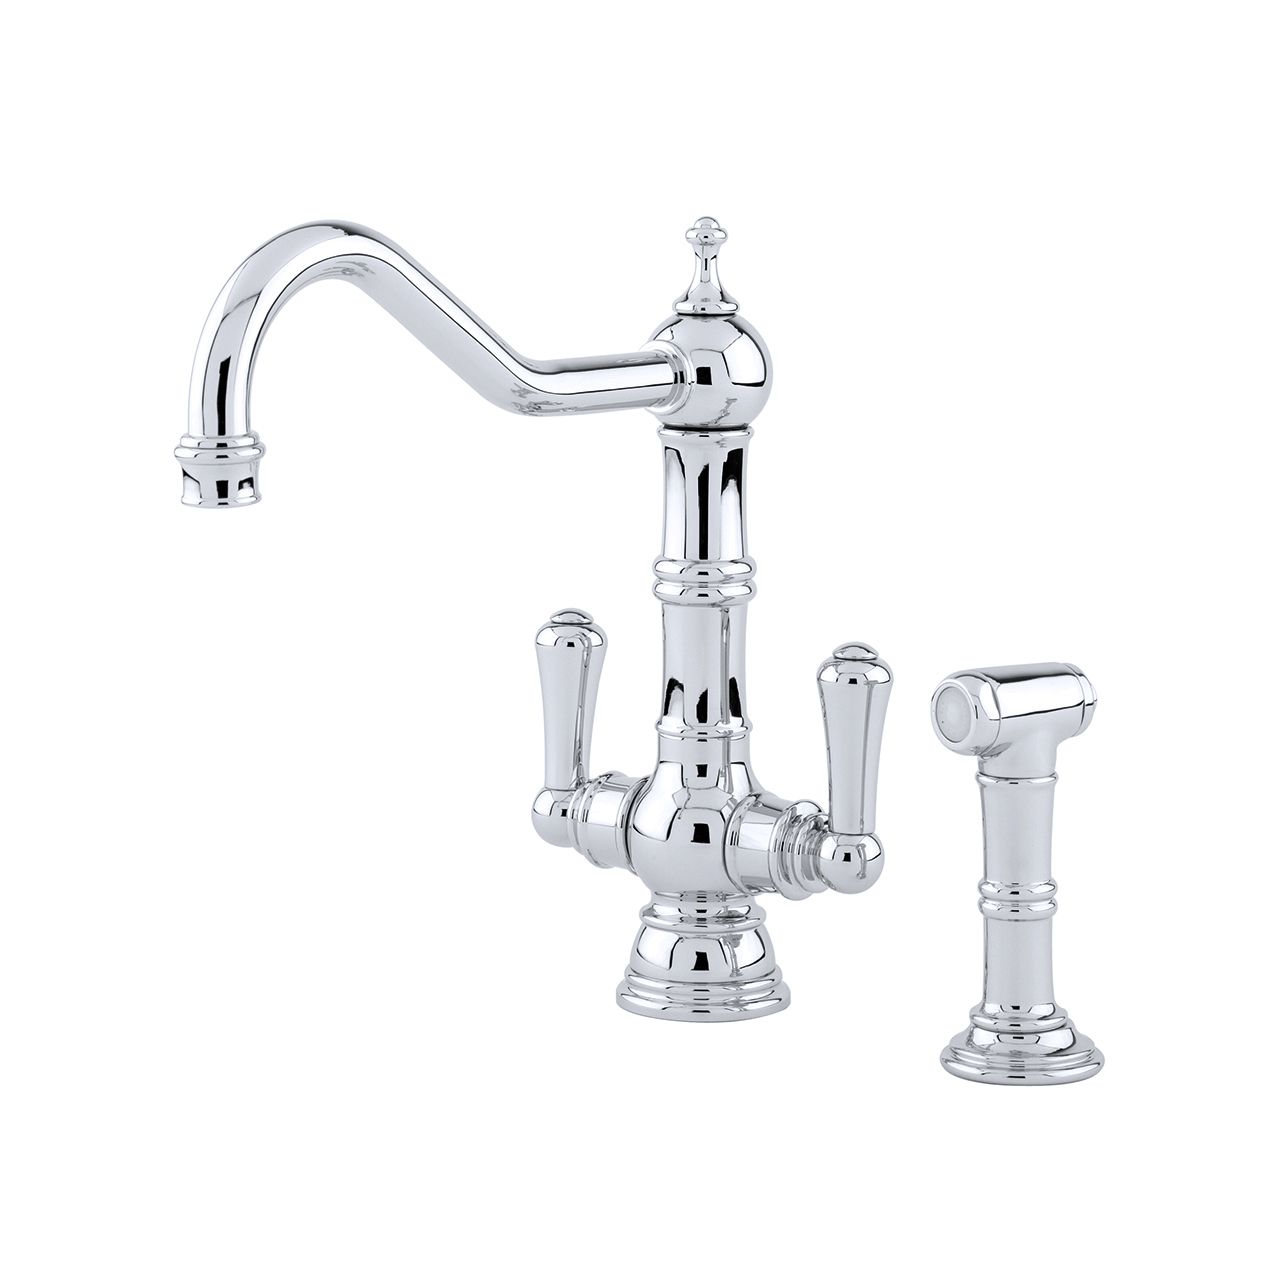 Provence Sink Mixer with Lever handles and Rinse – Perrin & Rowe